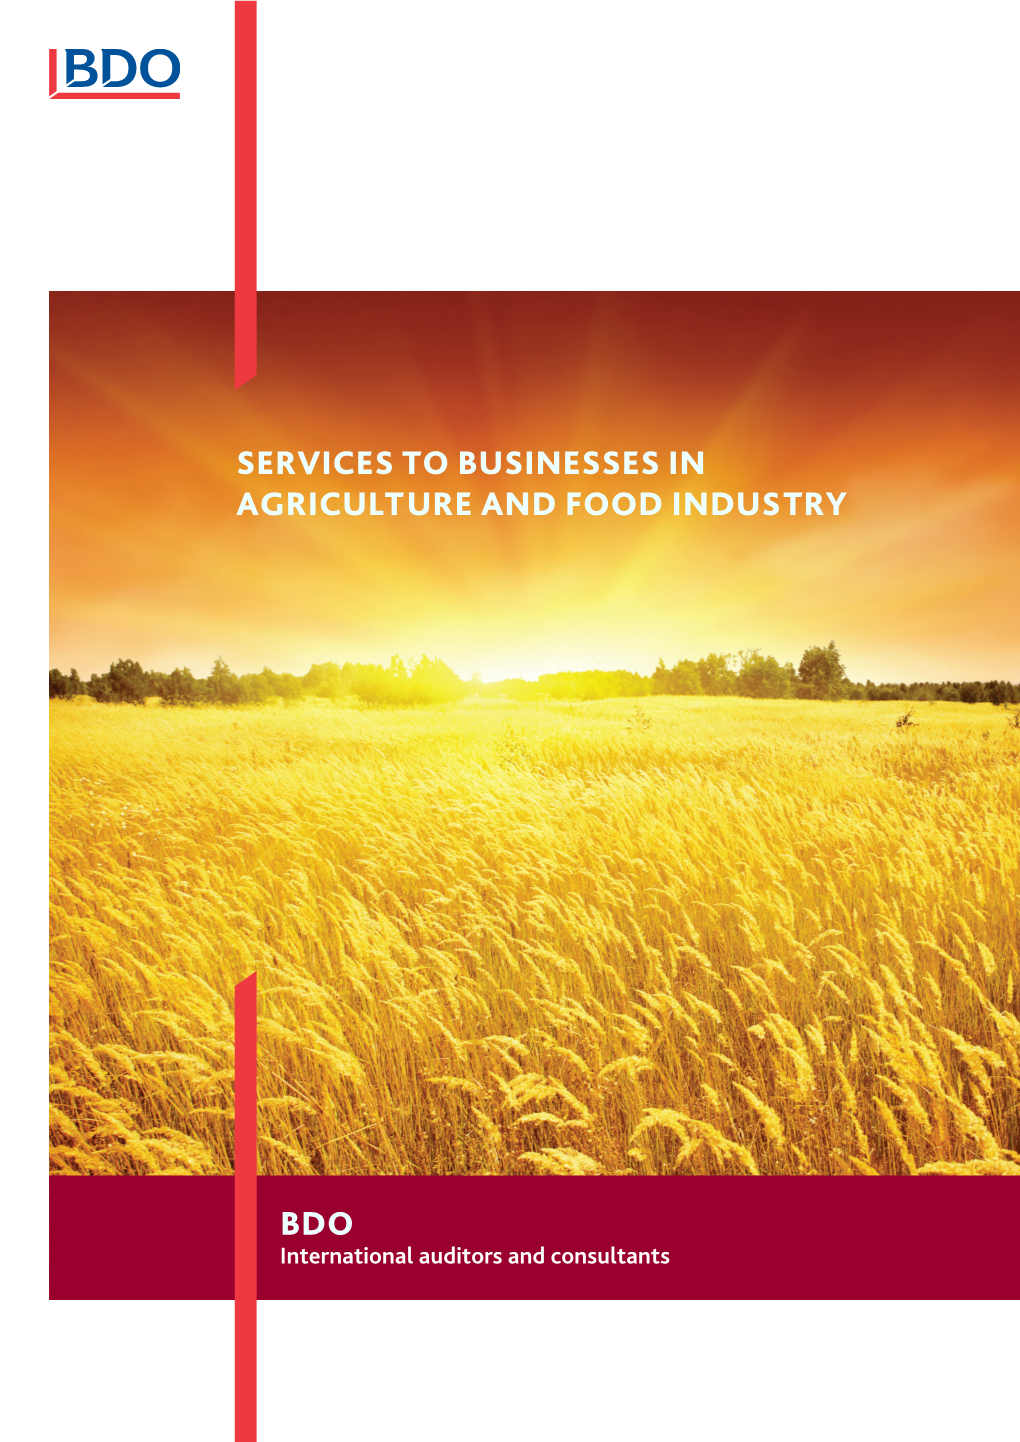 Services to Businesses in Agriculture and Food Industry